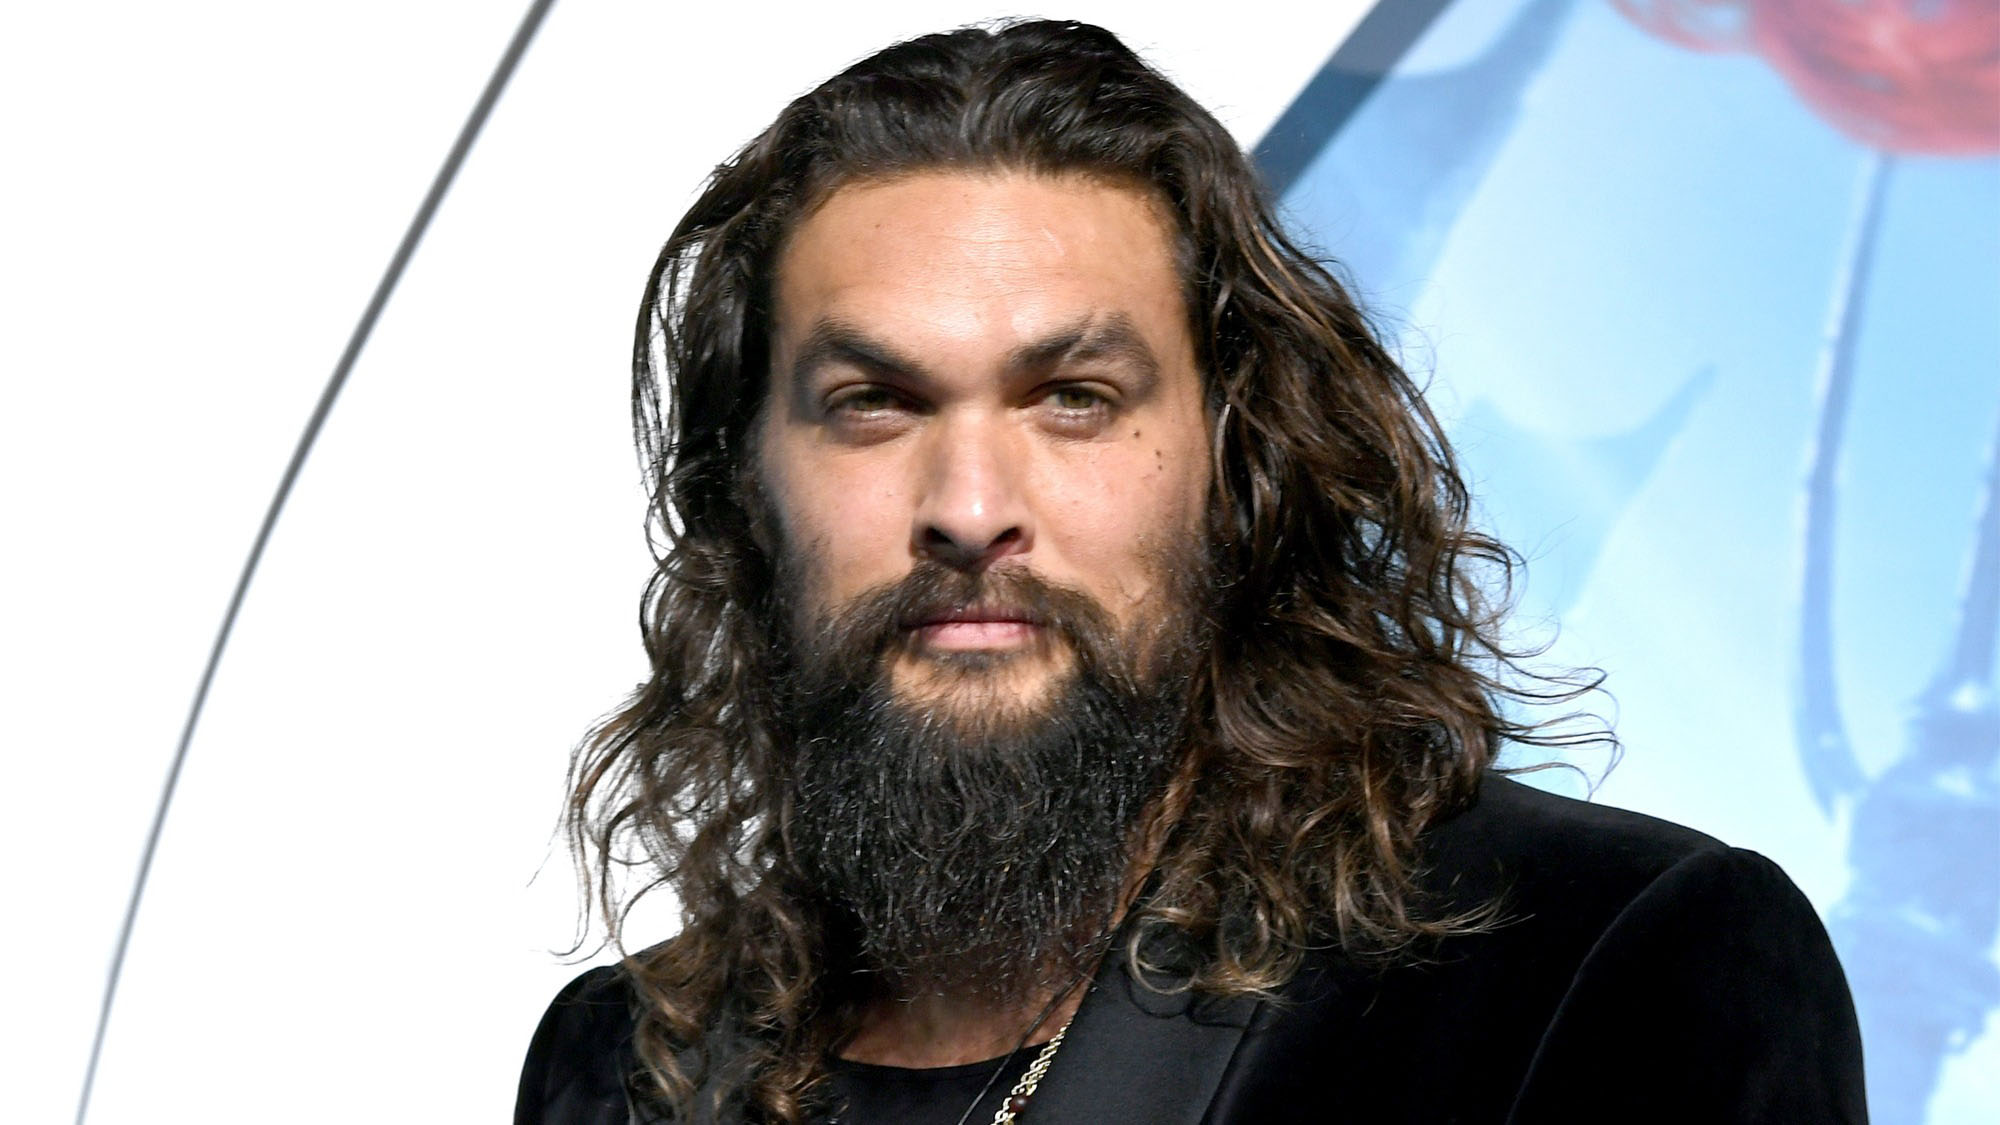 Joseph Jason Namakaeha Momoa (born August 1, 1979) is an American actor and producer. He made his acting debut as Jason Ioane on the syndicated action...